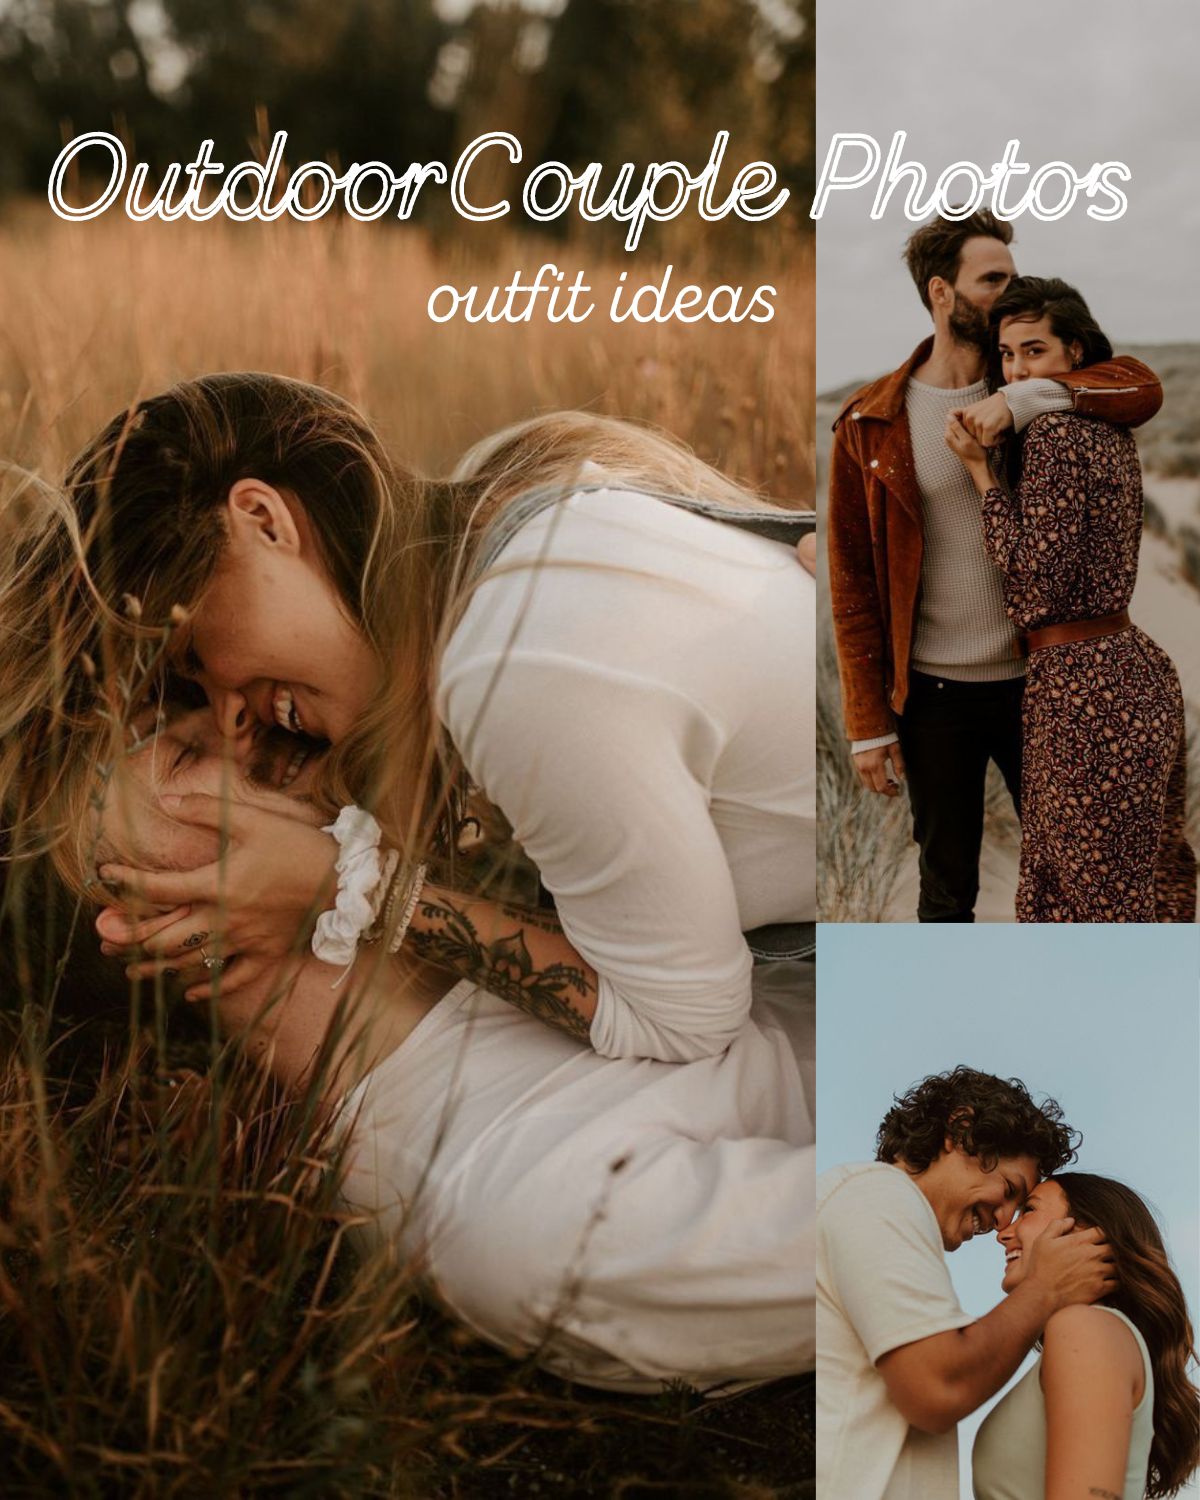 Outdoor couple outfit ideas for pictures in outdoor photos 